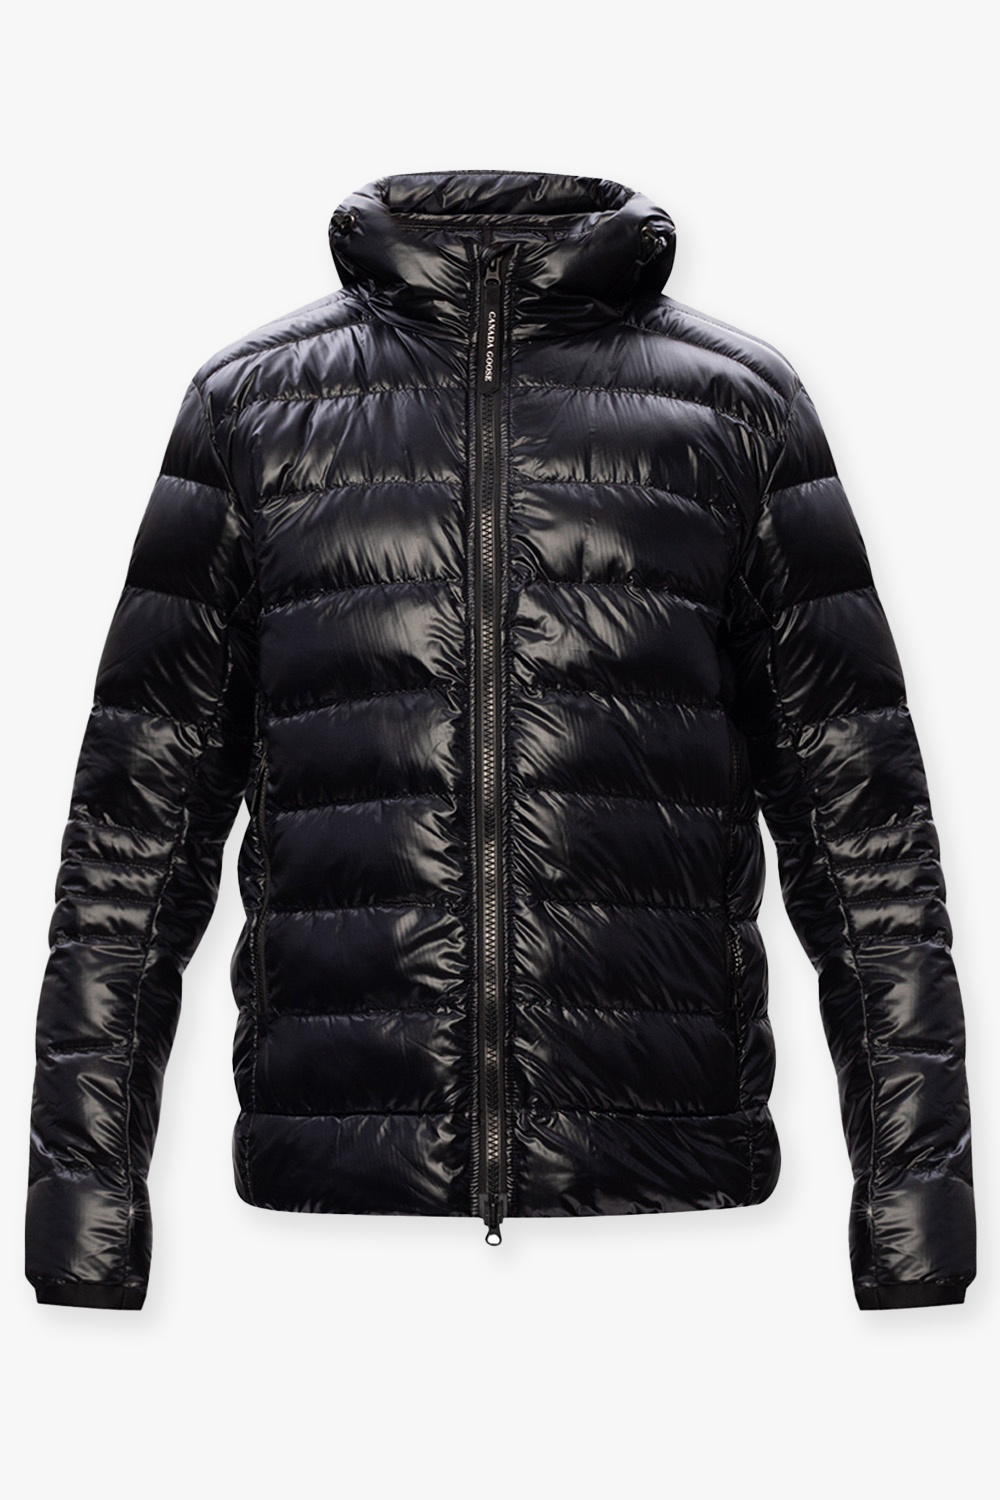 Canada Goose 'Crofton' quilted down jacket | Men's Clothing | Vitkac